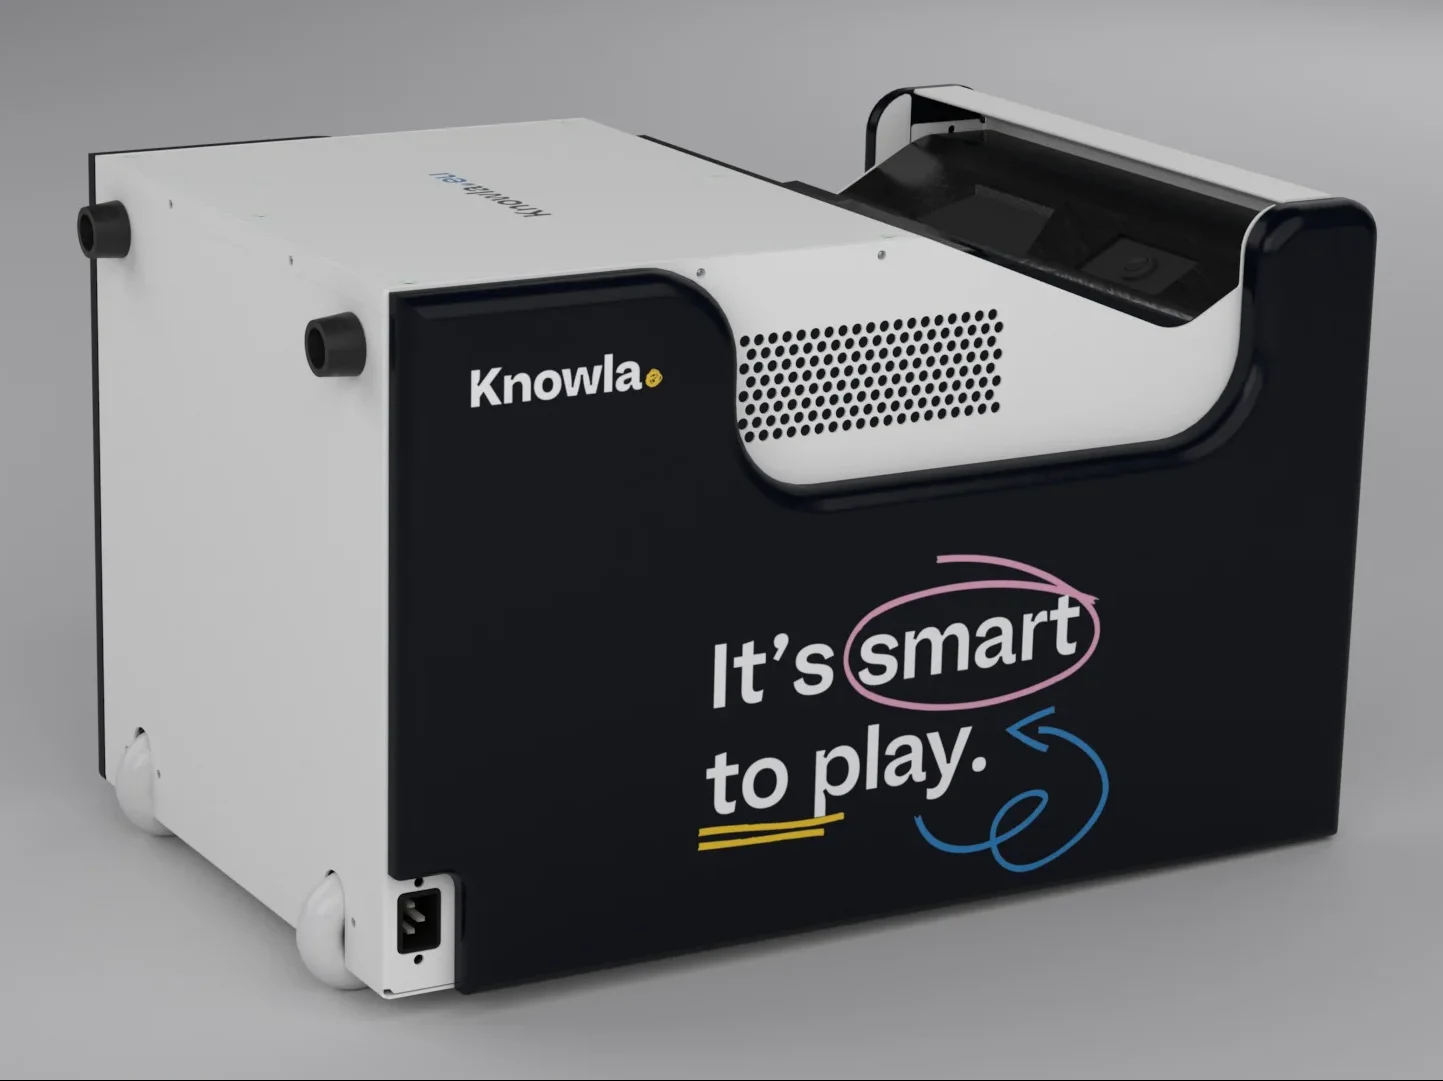 Preview image for Knowla Box28